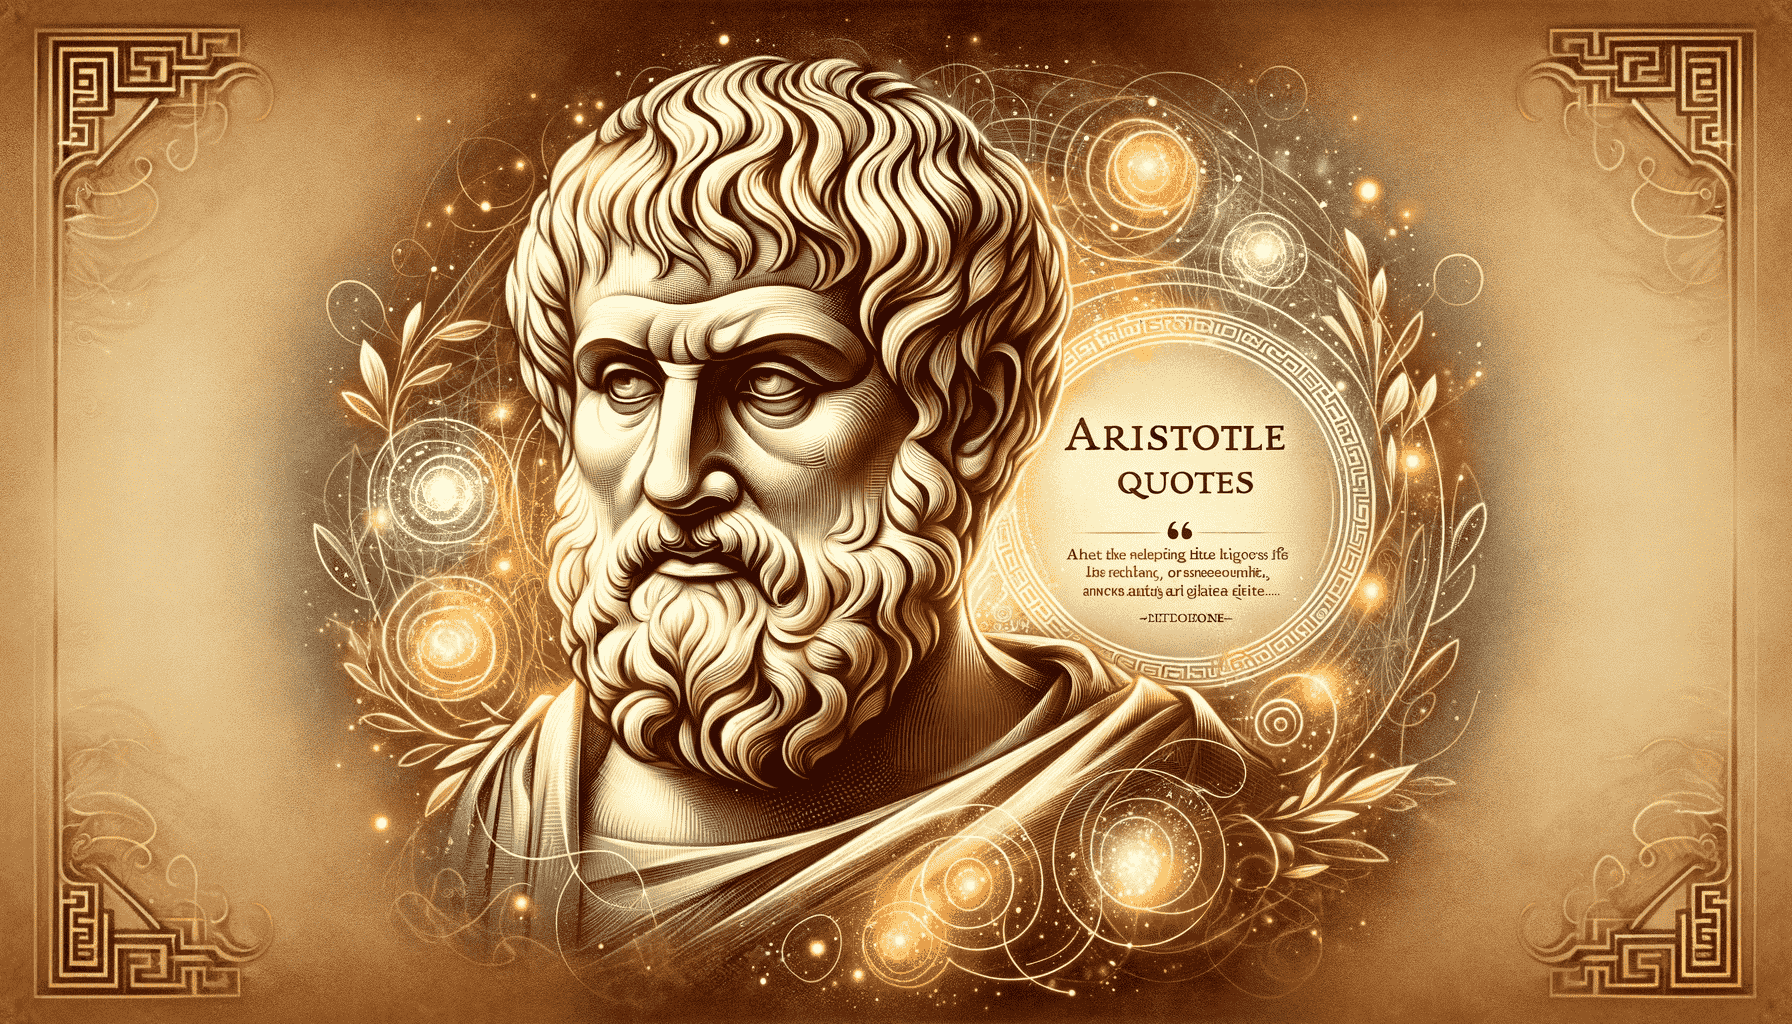 Aristotle quotes on life, ethics, wisdom and many more